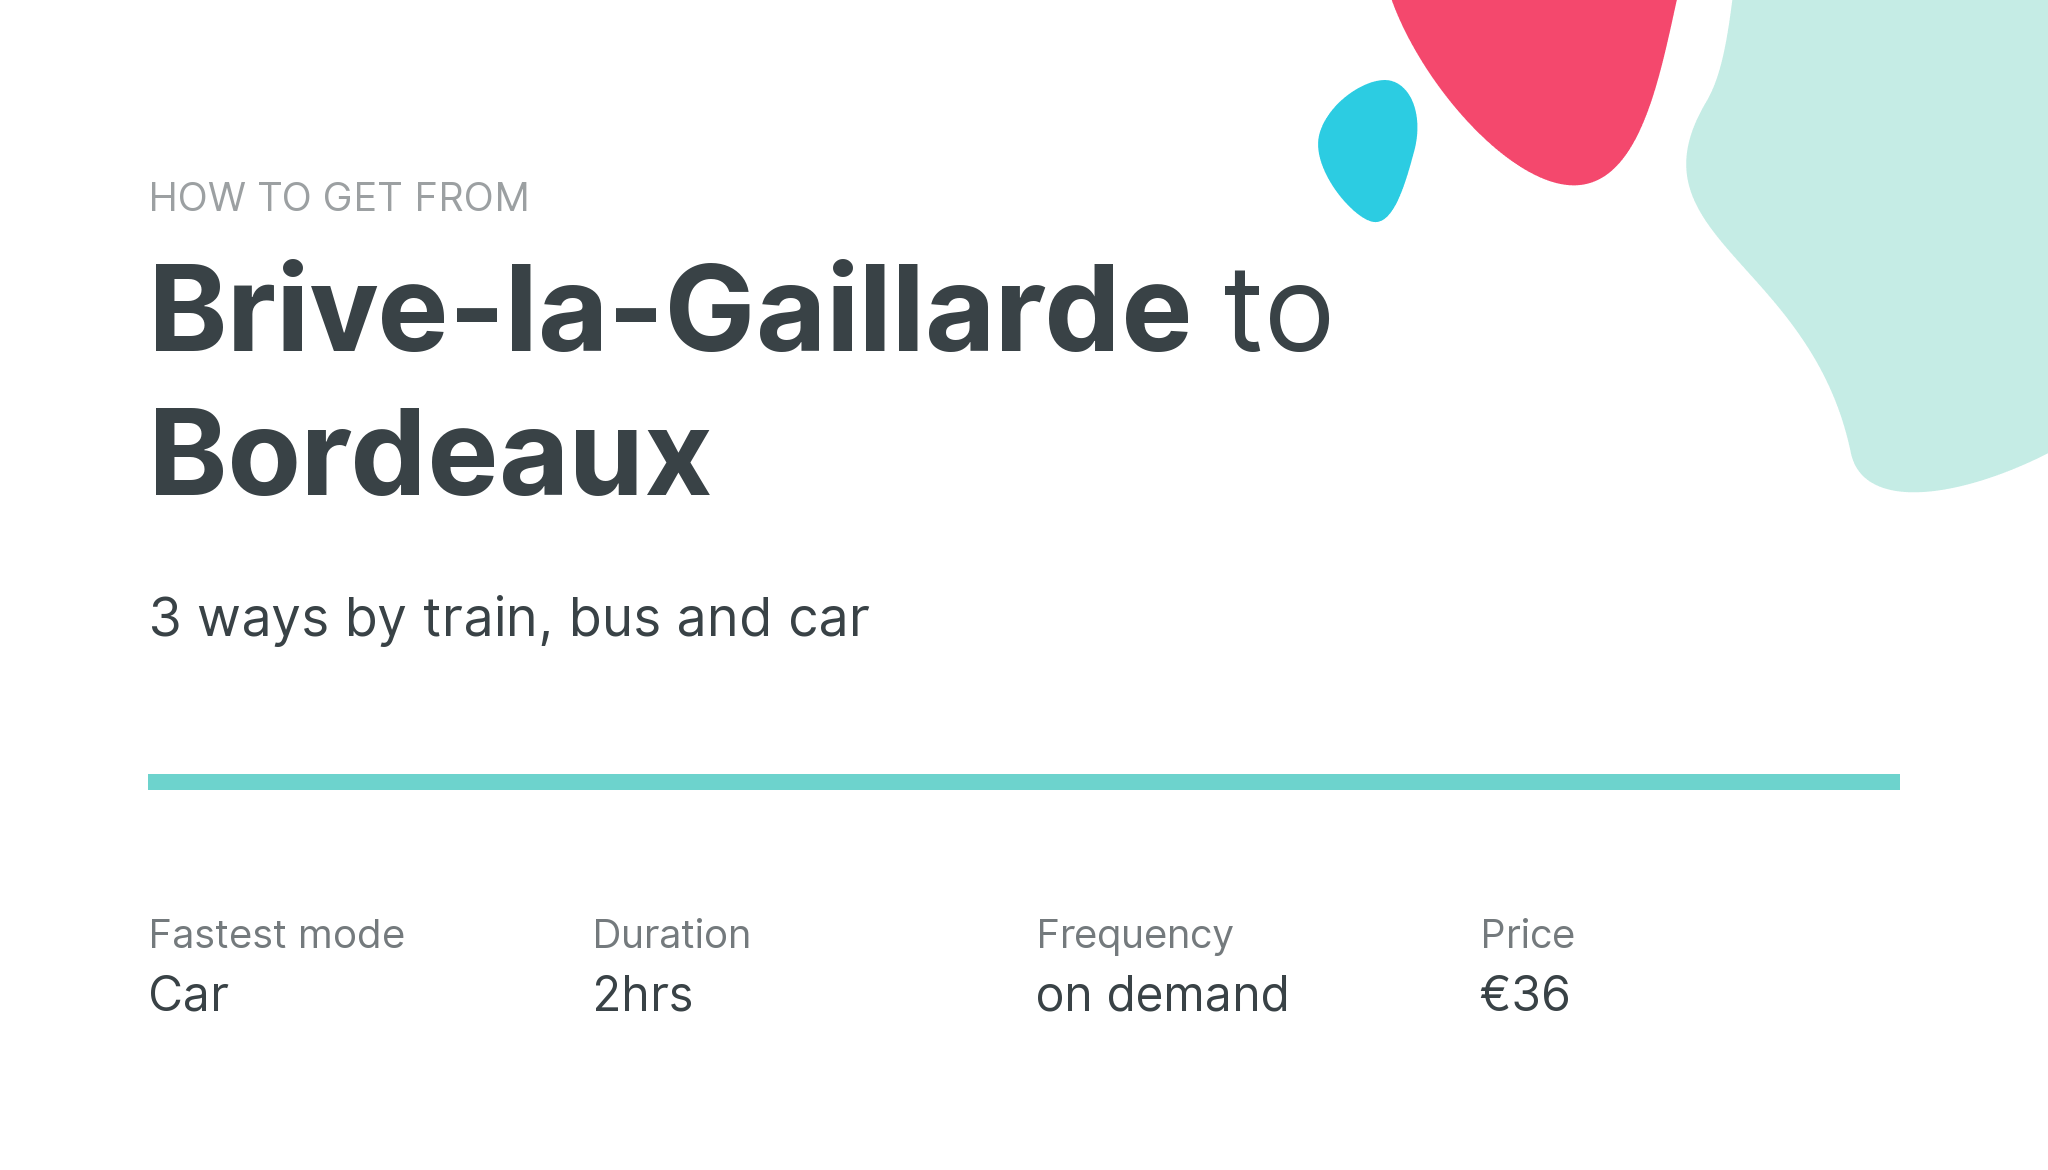 How do I get from Brive-la-Gaillarde to Bordeaux